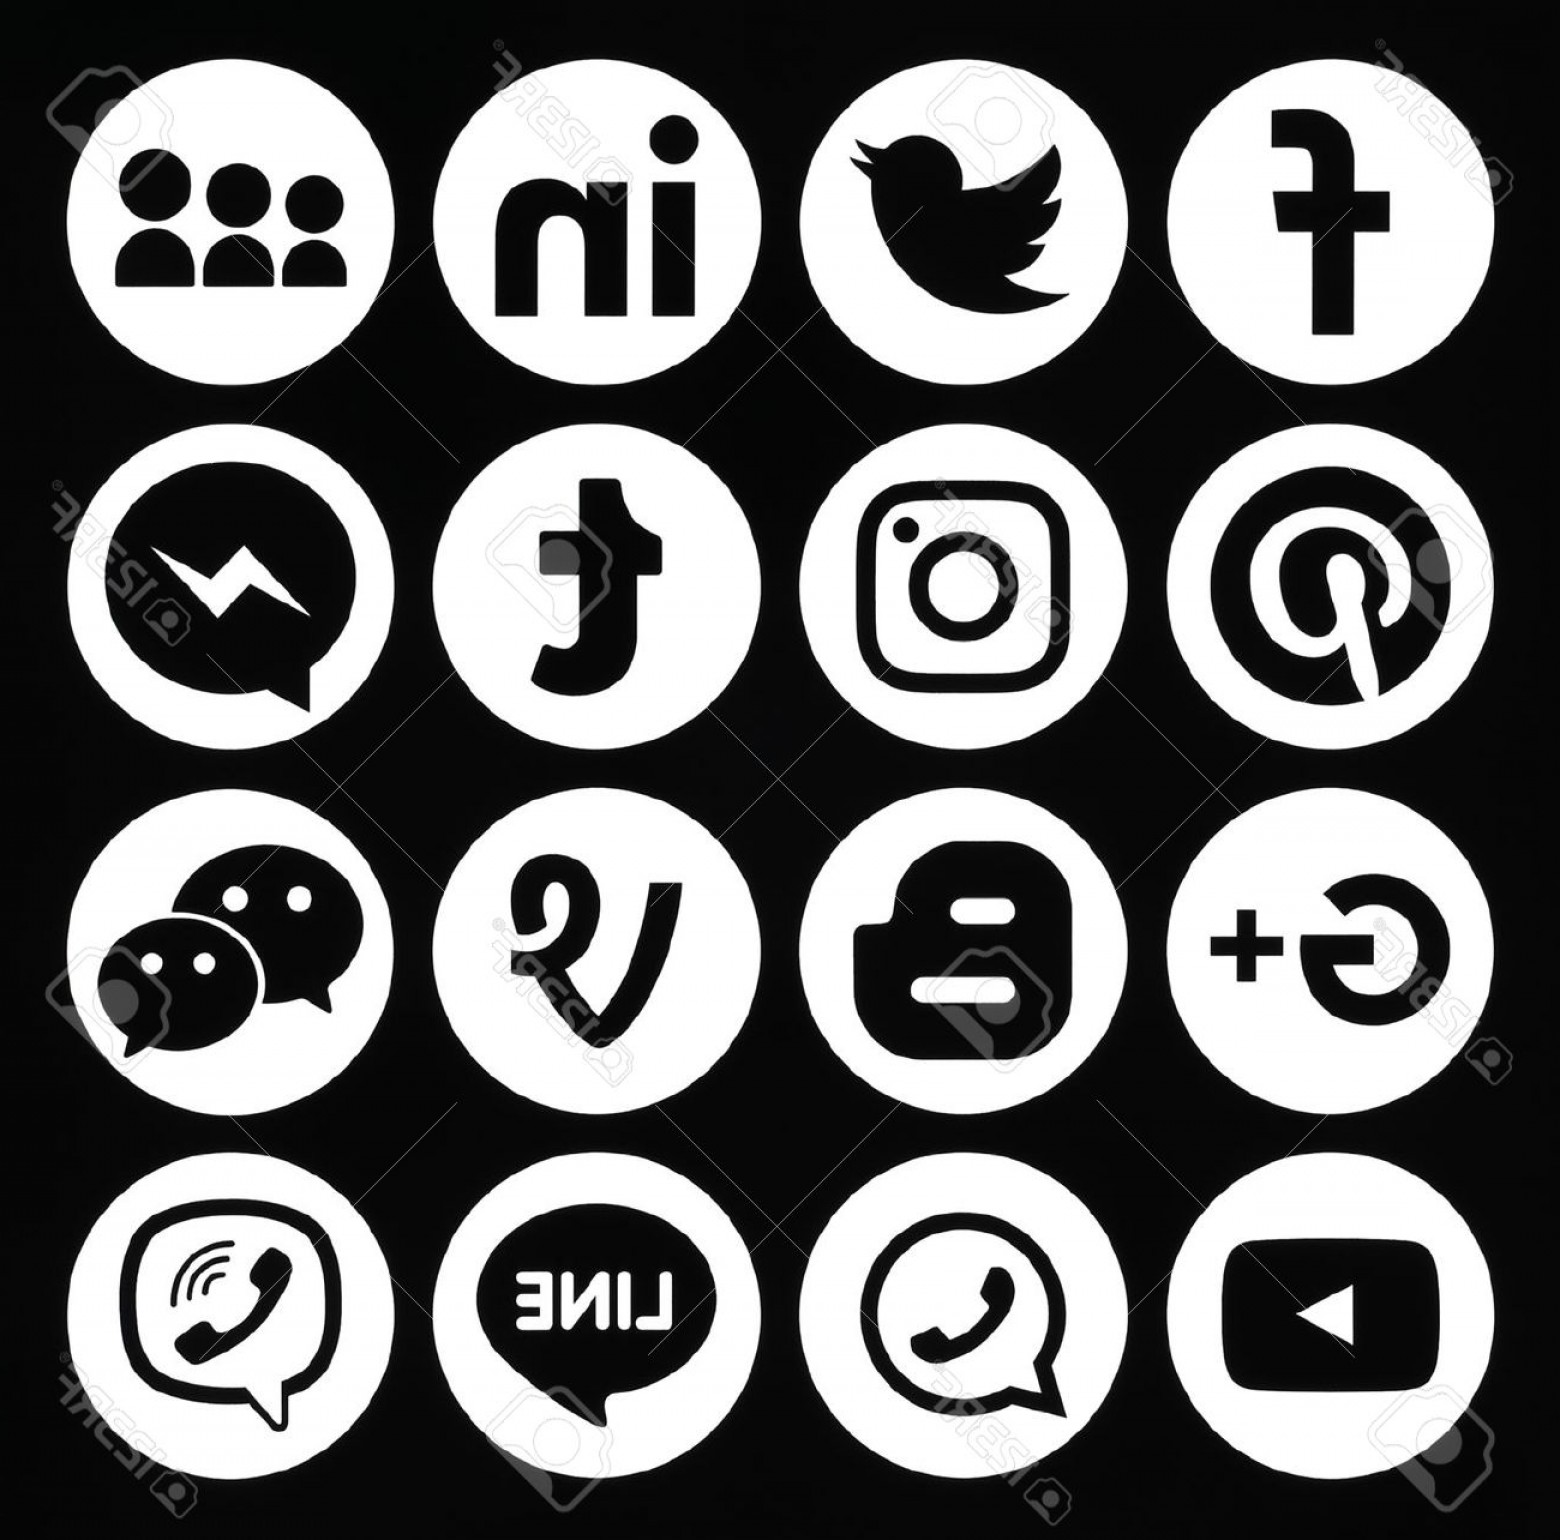 White Social Media Icon at Vectorified.com | Collection of White Social ...